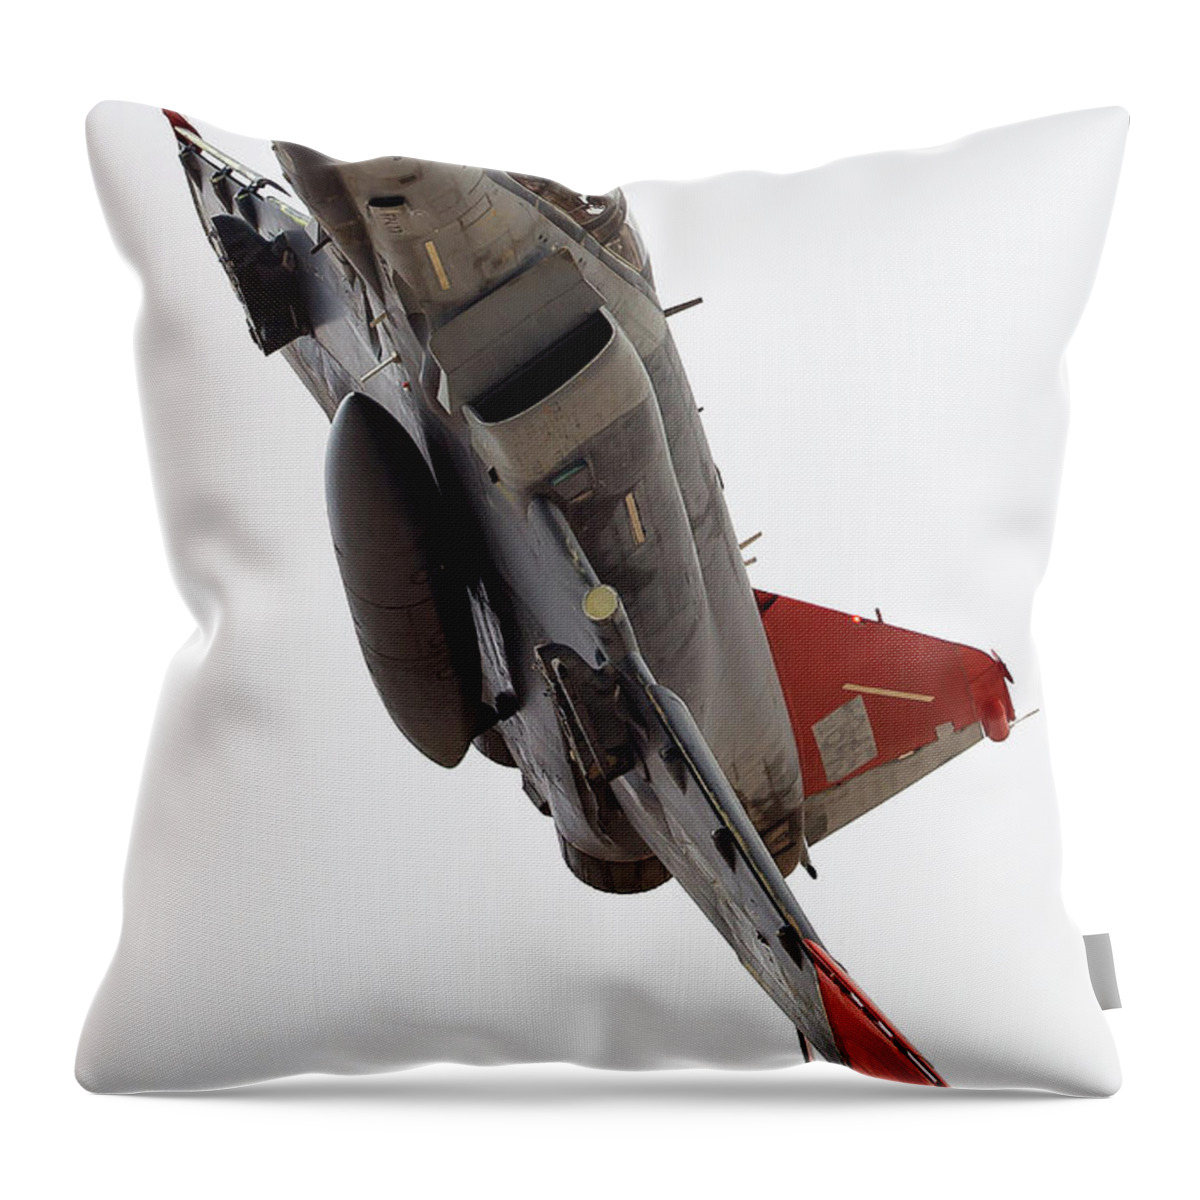 Alamagordo Throw Pillow featuring the photograph Hard Overhead by Jay Beckman